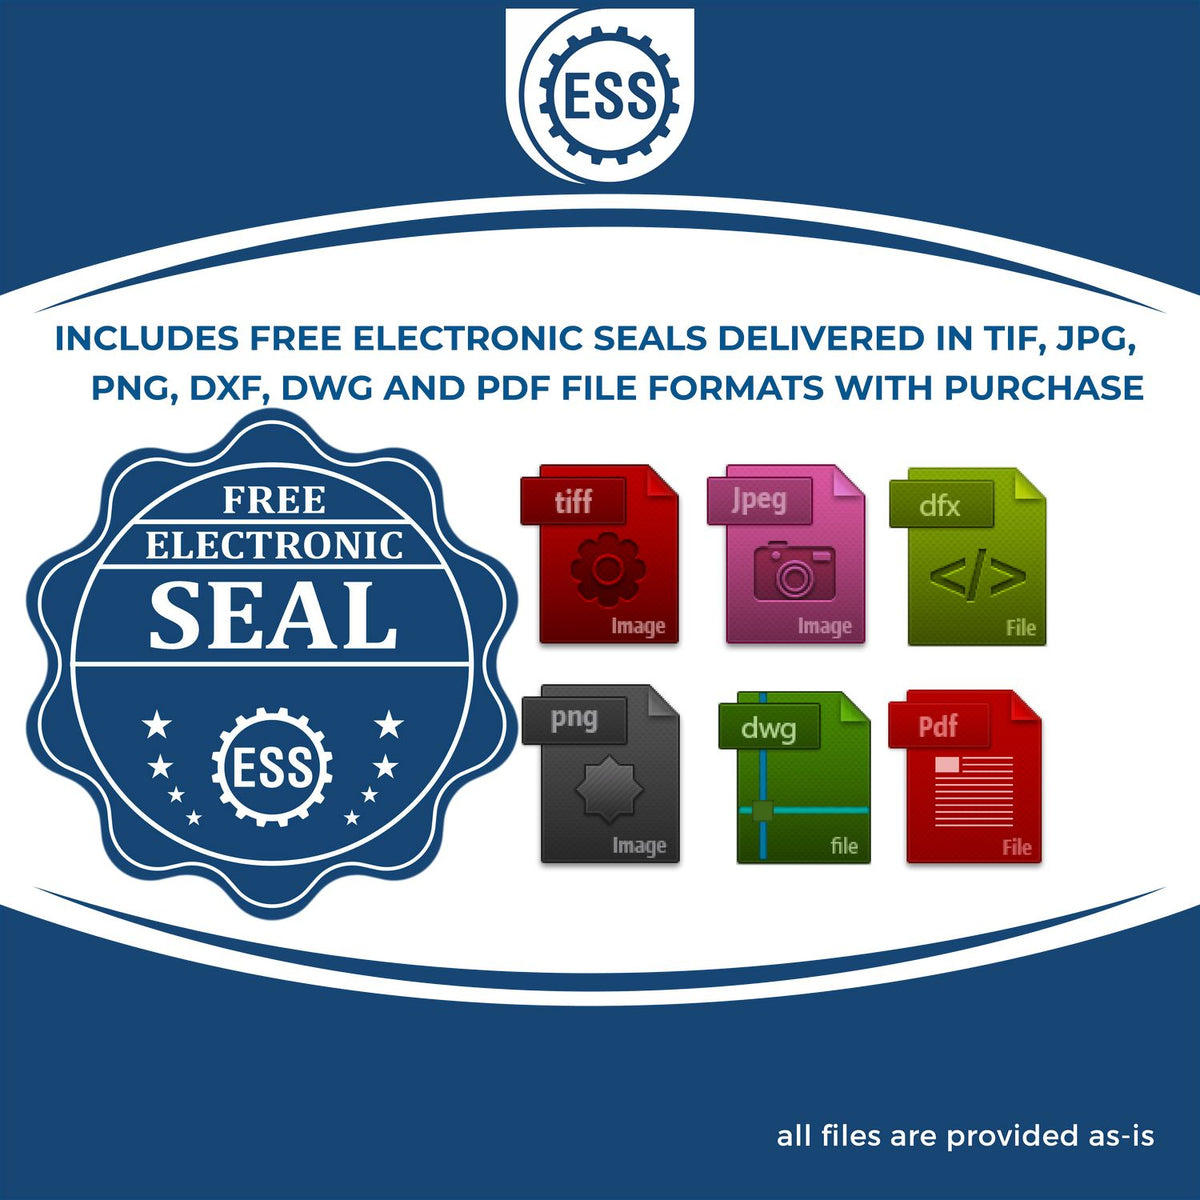 An infographic for the free electronic seal for the Hybrid Rhode Island Land Surveyor Seal illustrating the different file type icons such as DXF, DWG, TIF, JPG and PNG.